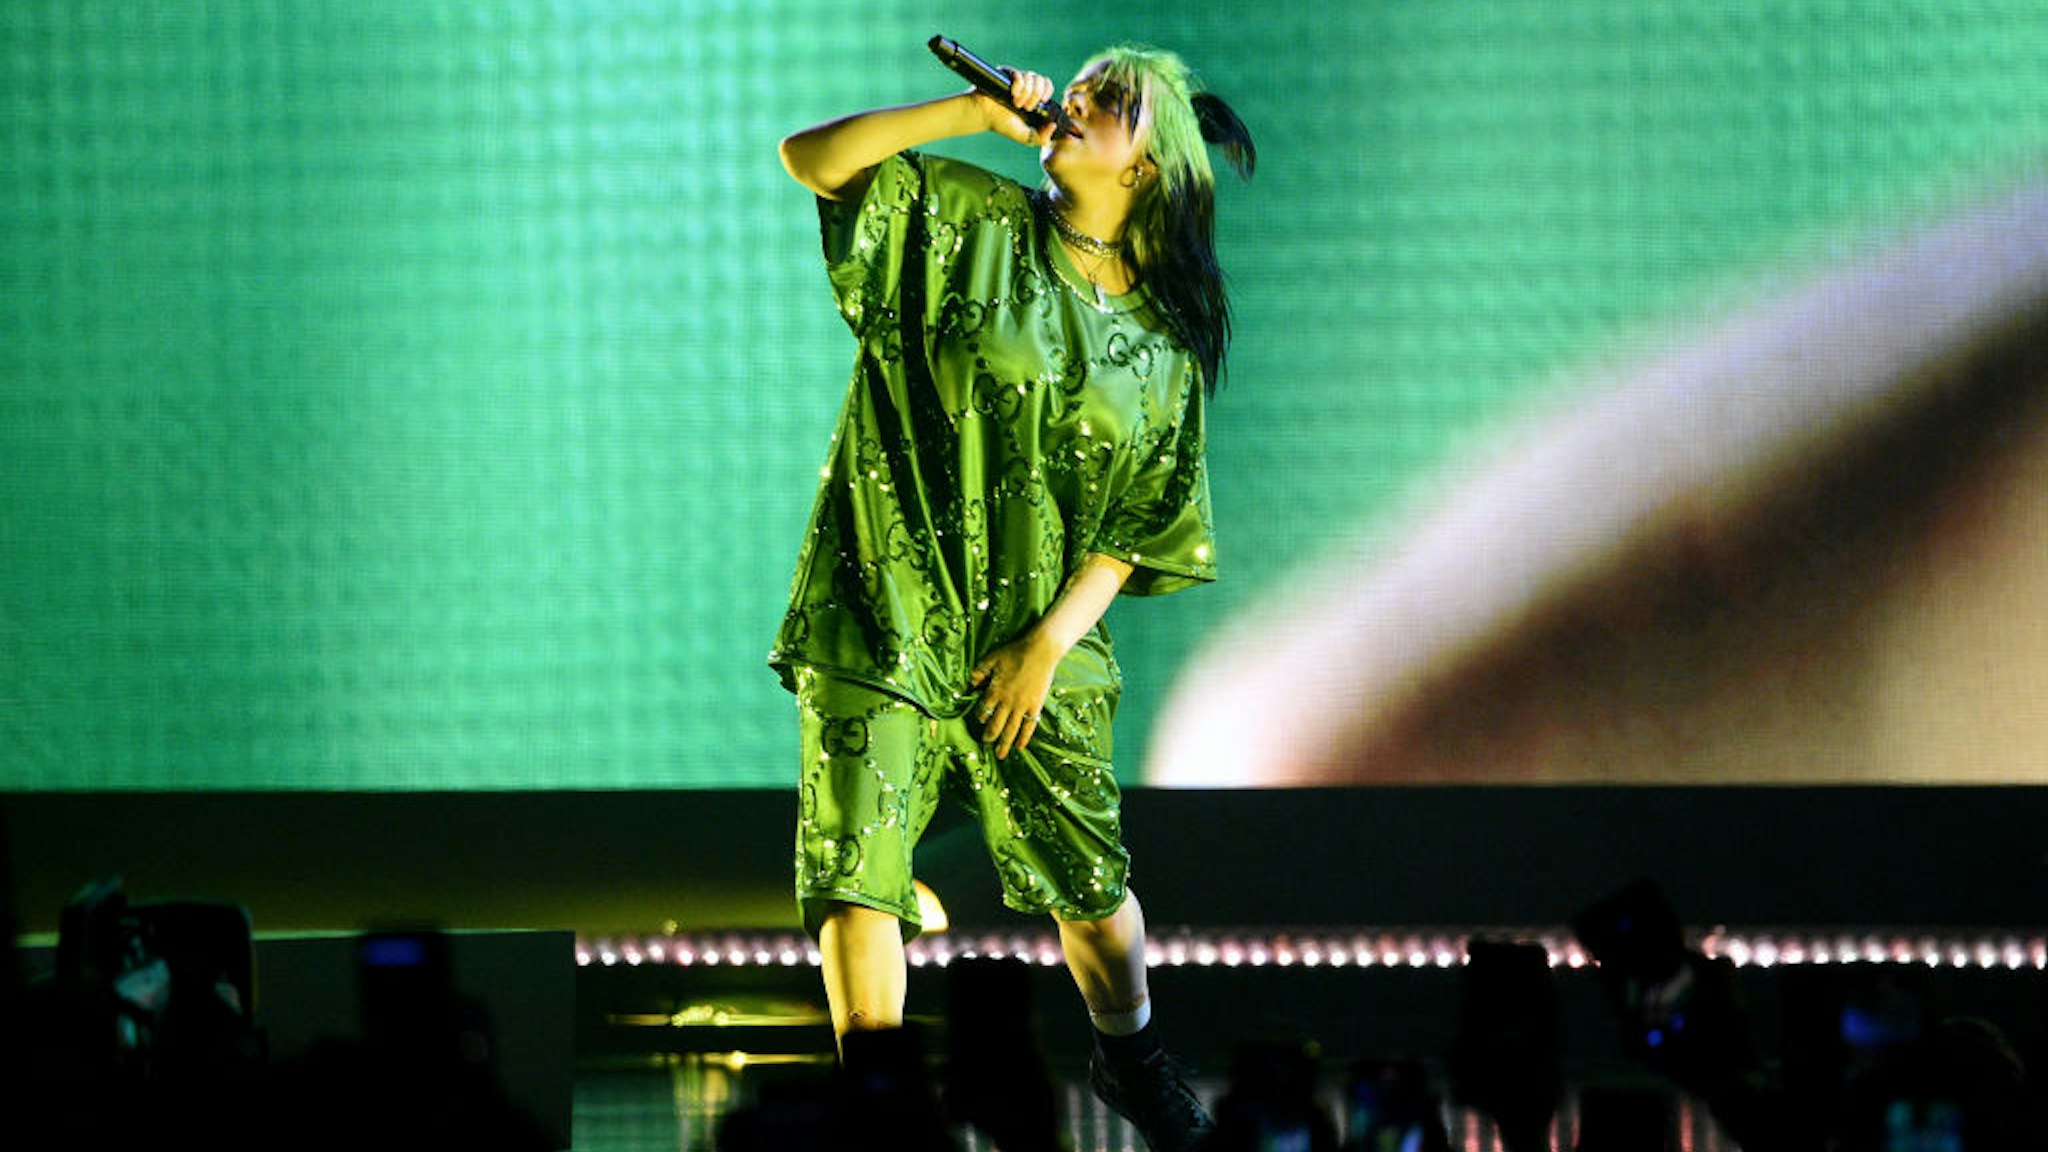 Billie Eilish performs live on stage at Billie Eilish "Where Do We Go?" World Tour Kick Off - Miami at American Airlines Arena on March 09, 2020 in Miami, Florida.